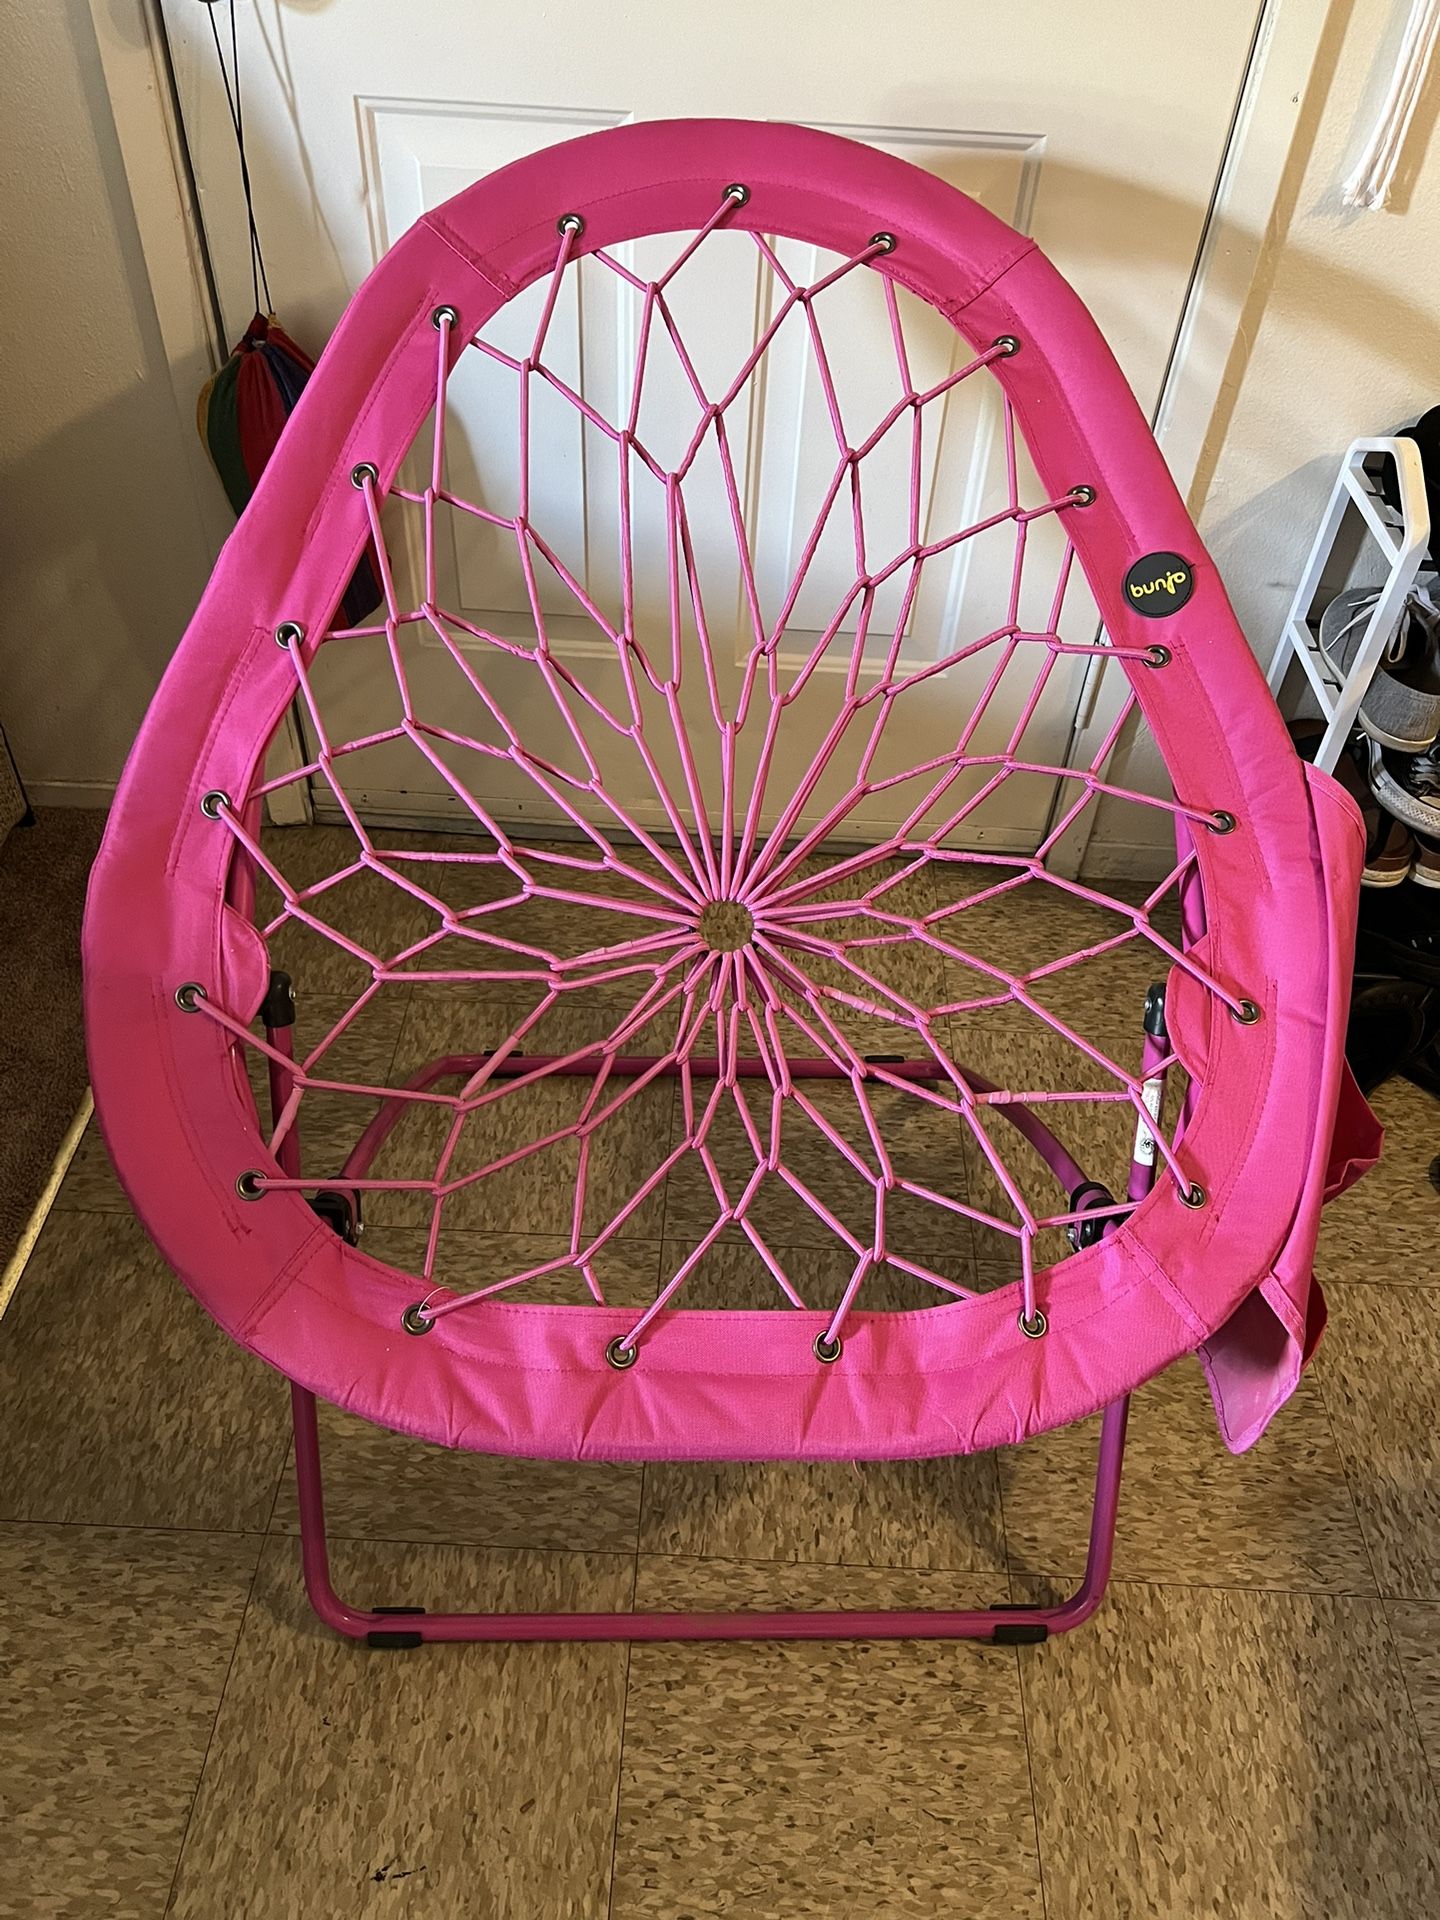 Bungee Chair And Children’s Tent